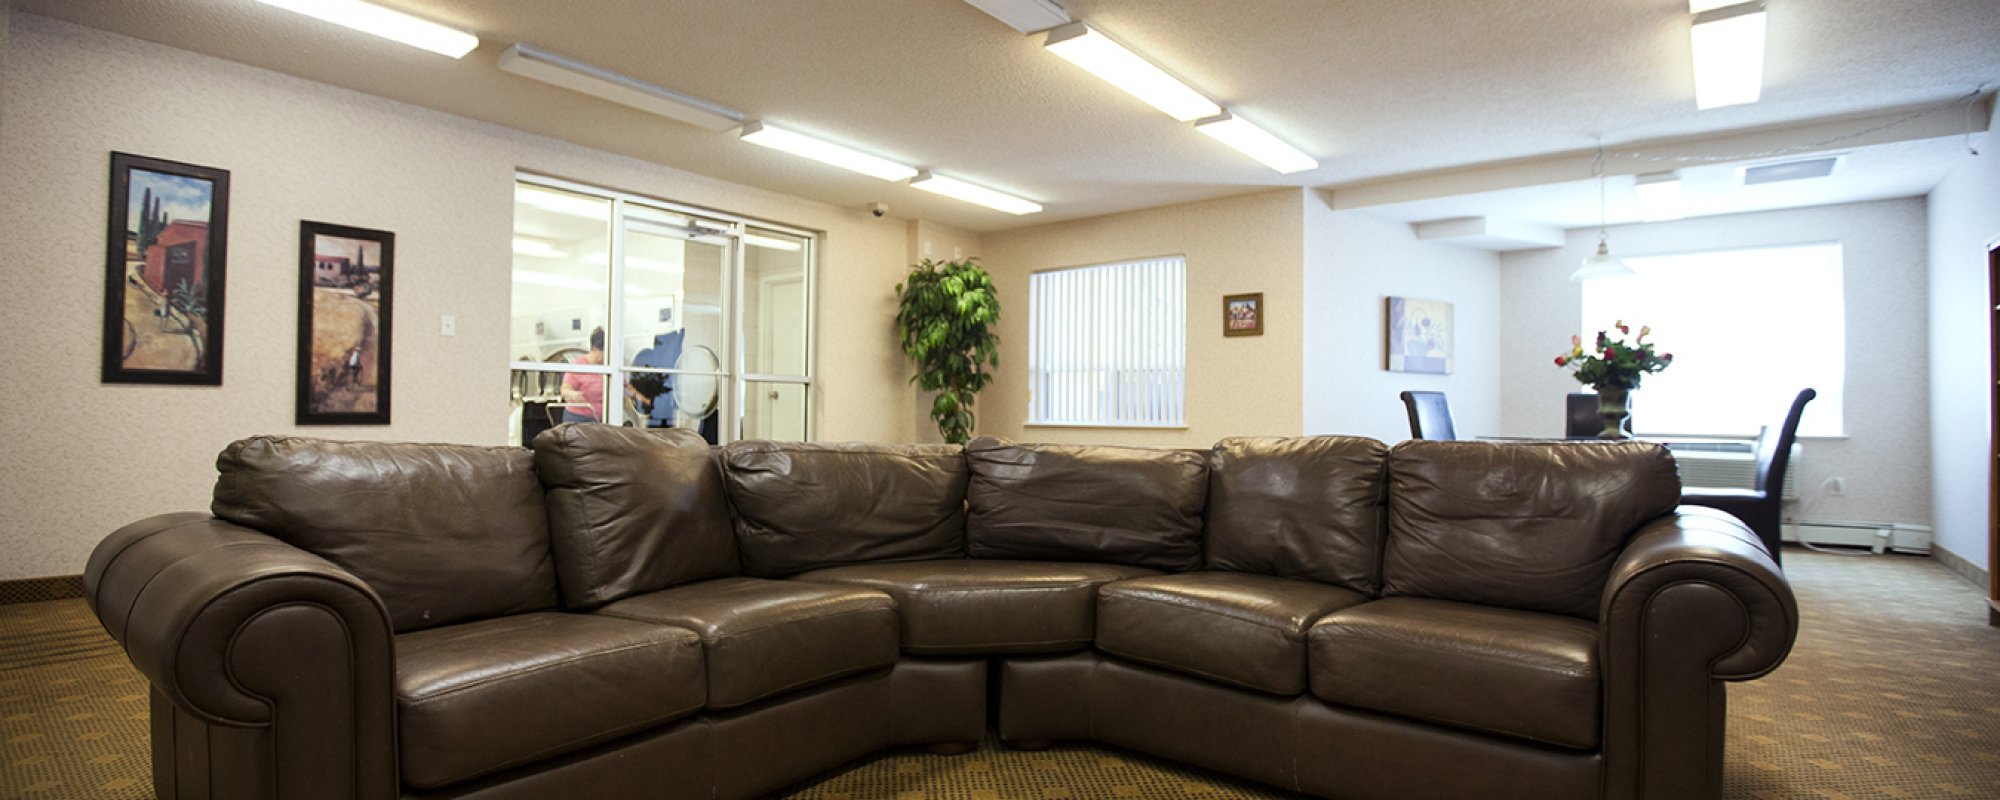 Common area at a luxury apartment for rent in London, Ontario